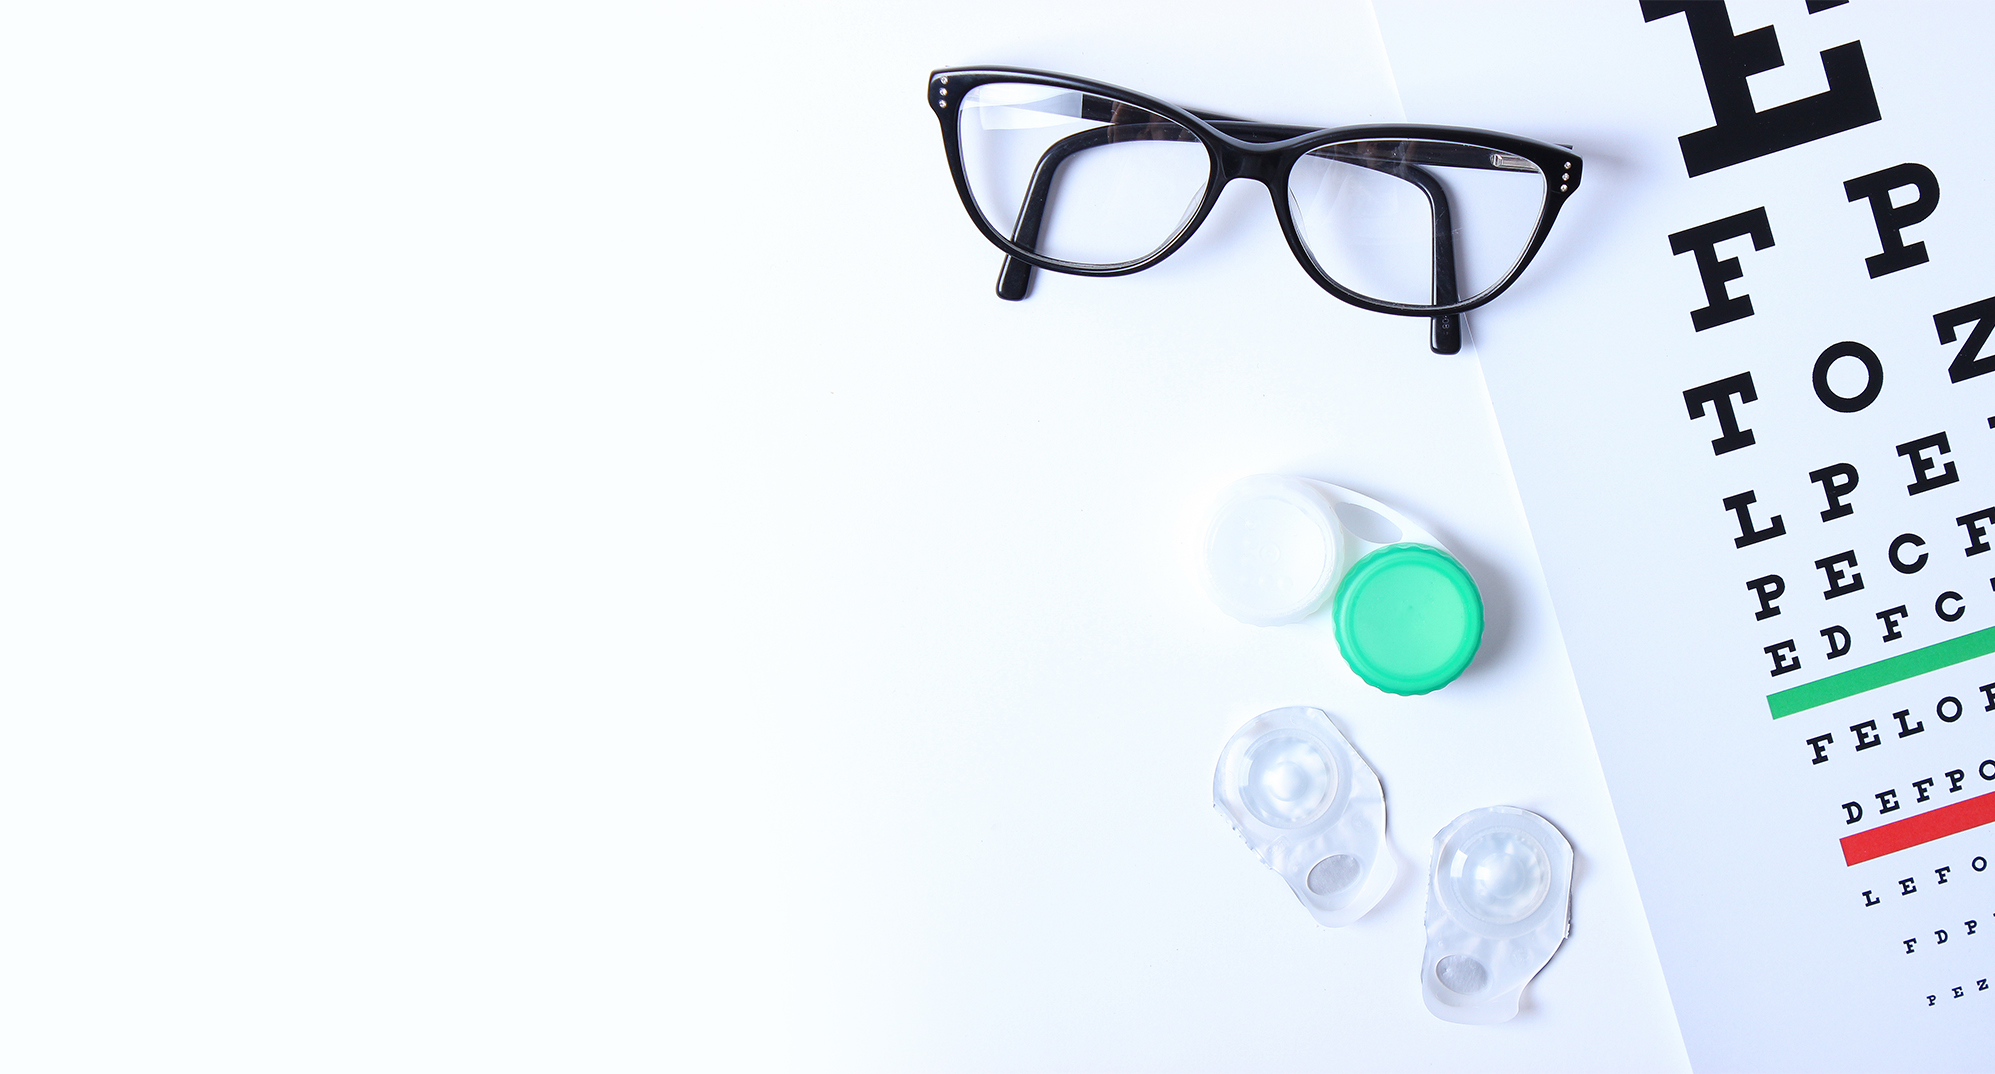 Glasses contact lens case and eye chart